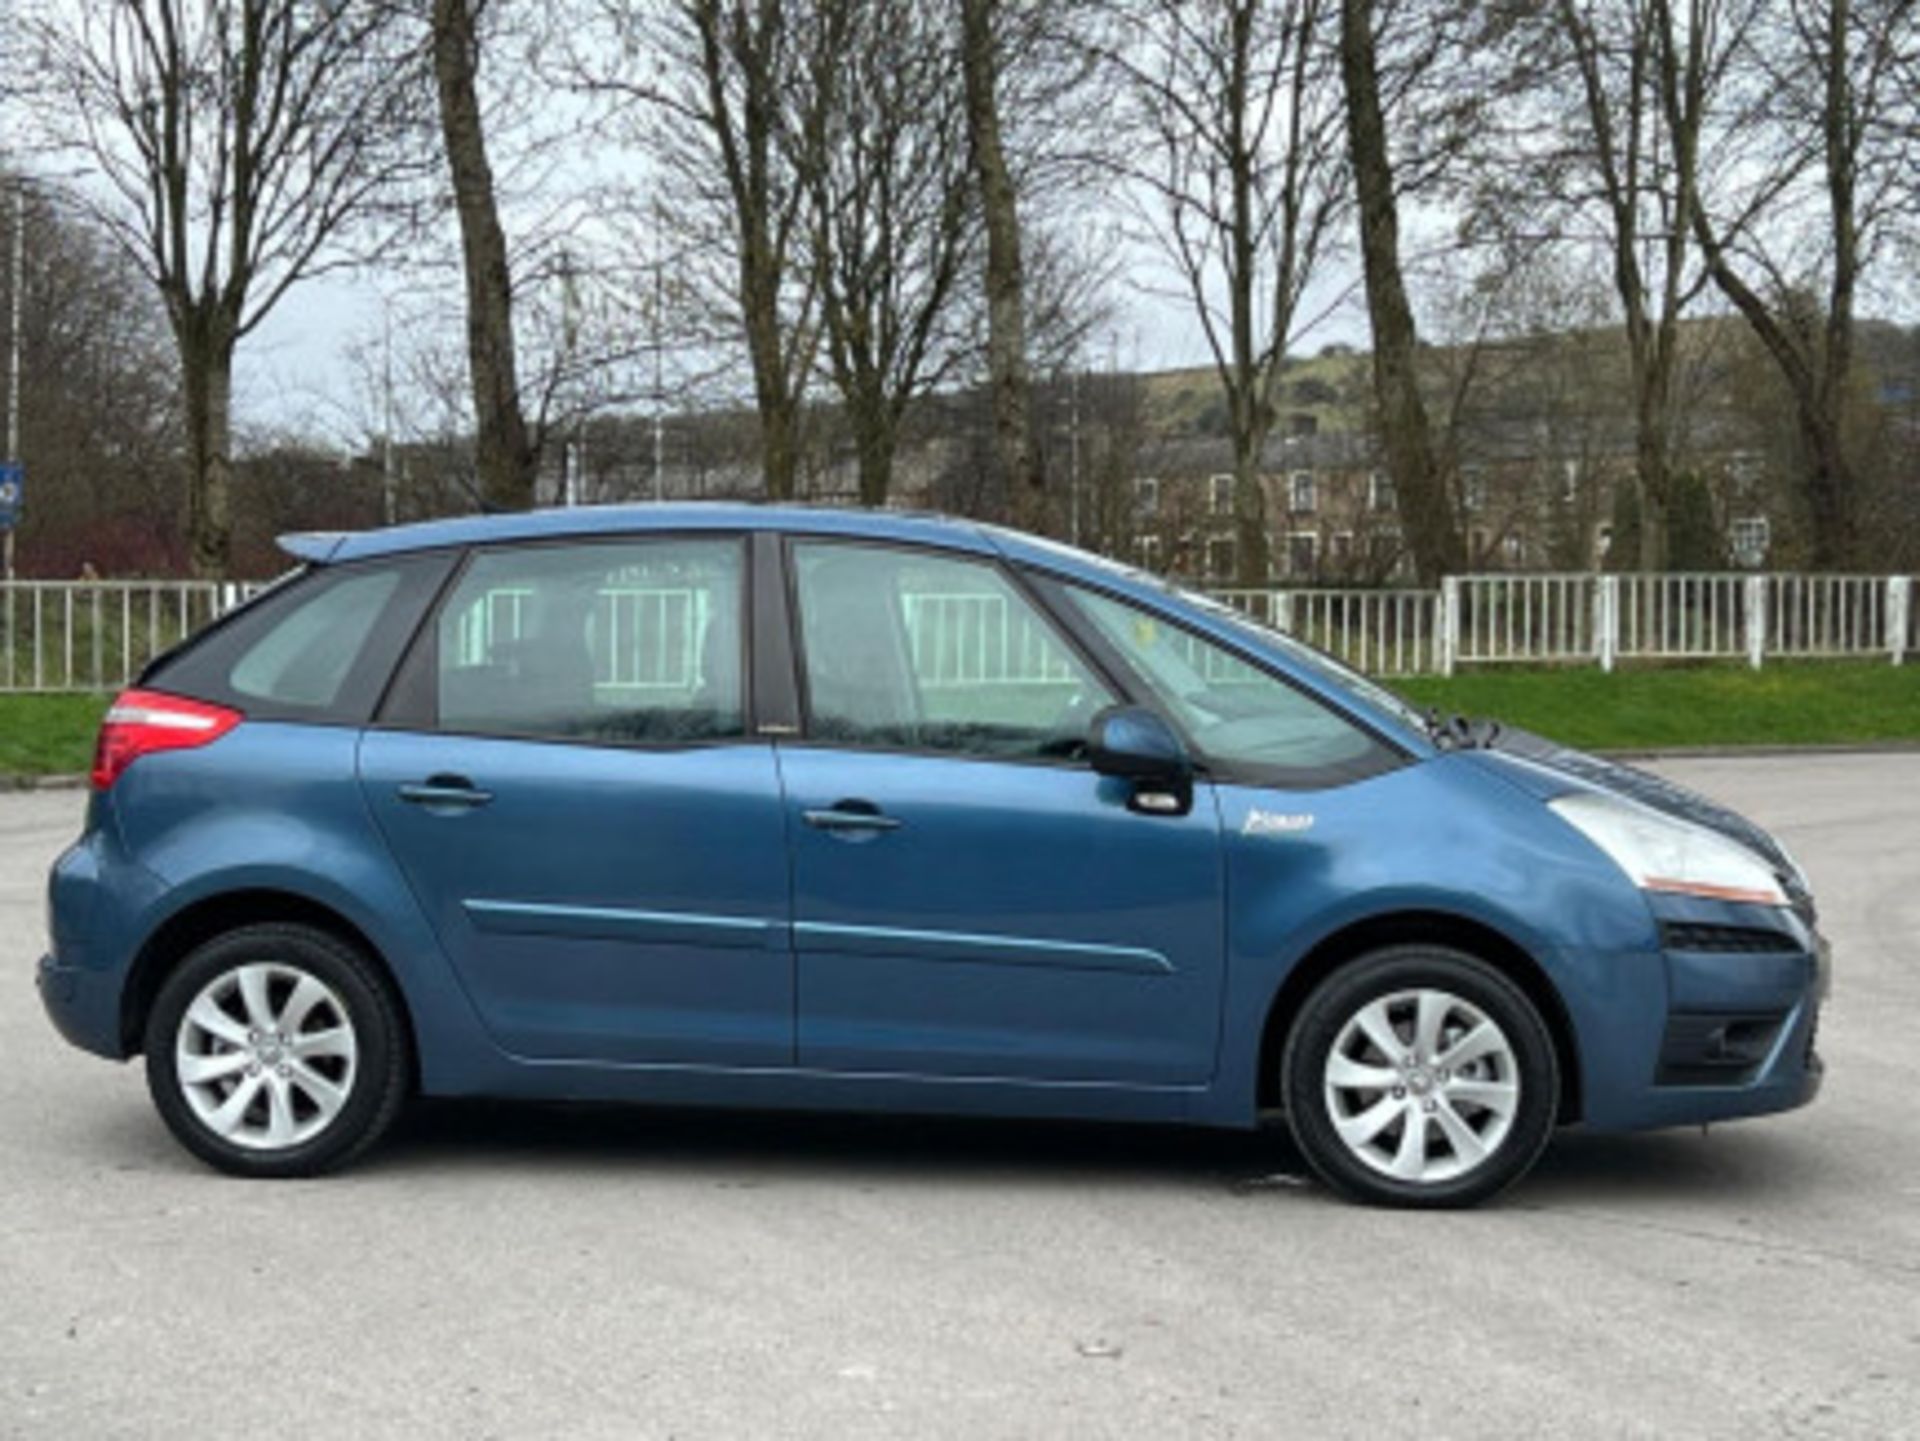 2009 CITROEN C4 PICASSO 1.6 HDI VTR+ EGS6 5DR >>--NO VAT ON HAMMER--<< - Image 57 of 123